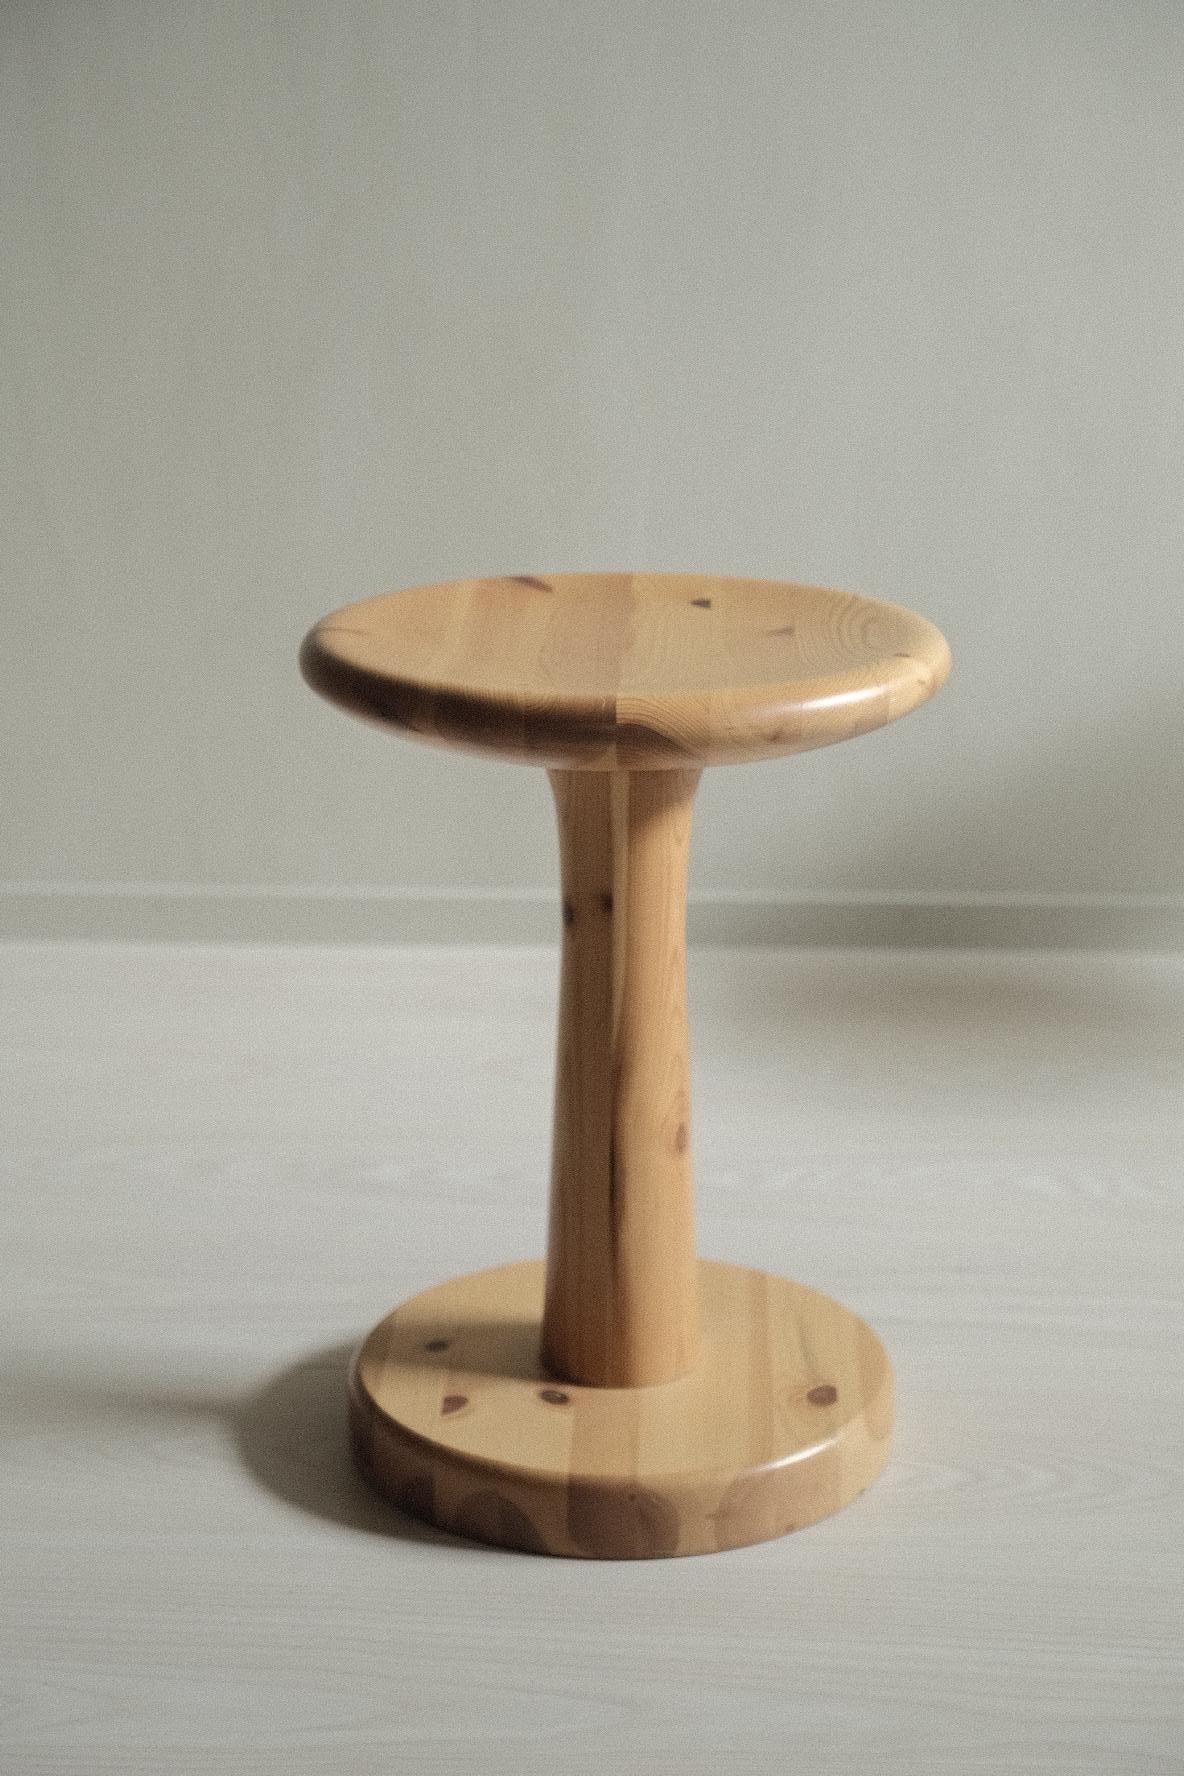 Set of 4 Pine Stools by Rainer Daumiller for Hirthals Savværk, Denmark, 1970s In Good Condition For Sale In Hønefoss, 30